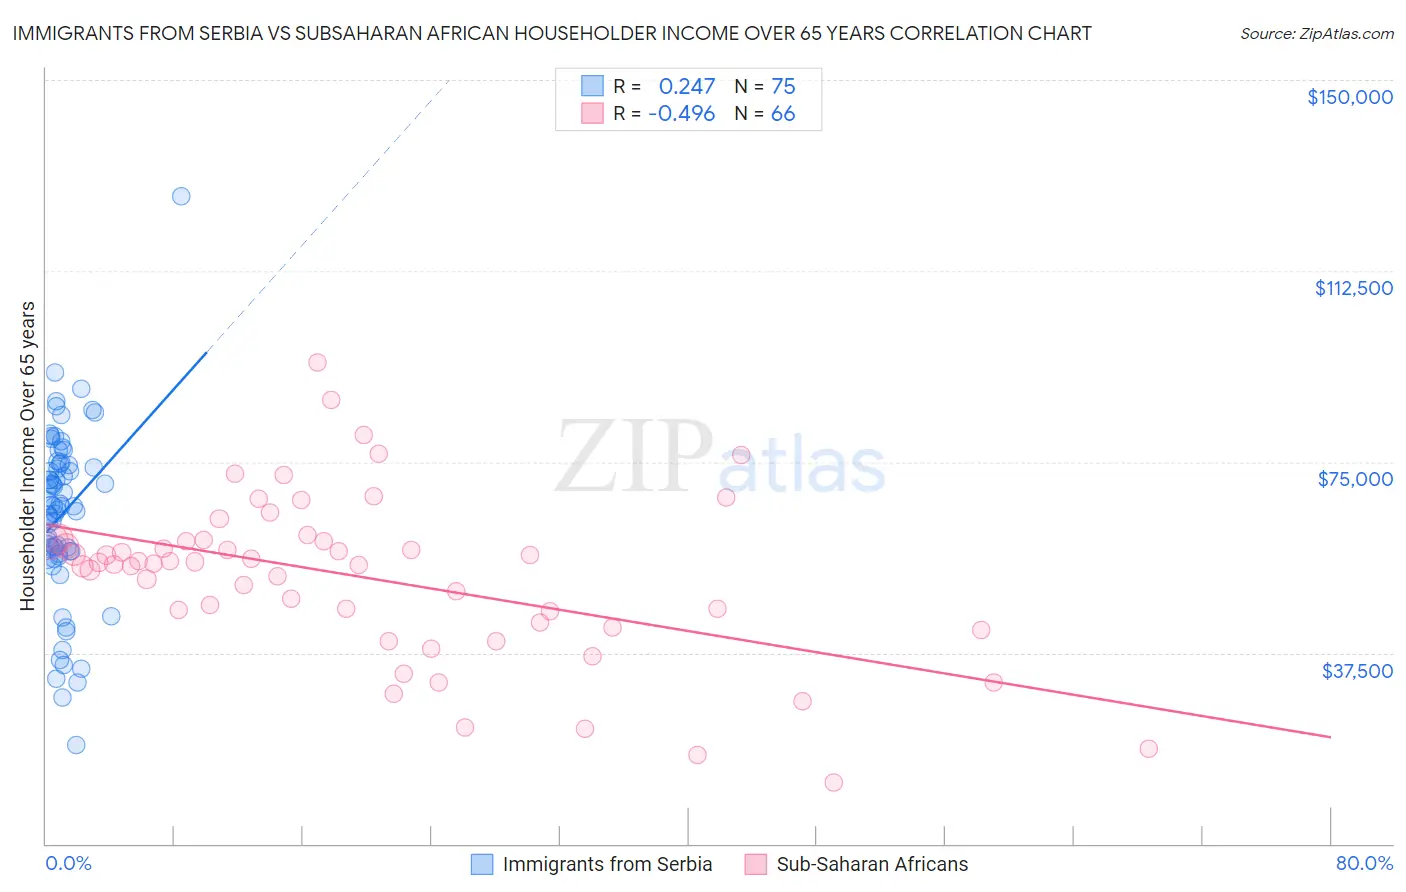 Immigrants from Serbia vs Subsaharan African Householder Income Over 65 years